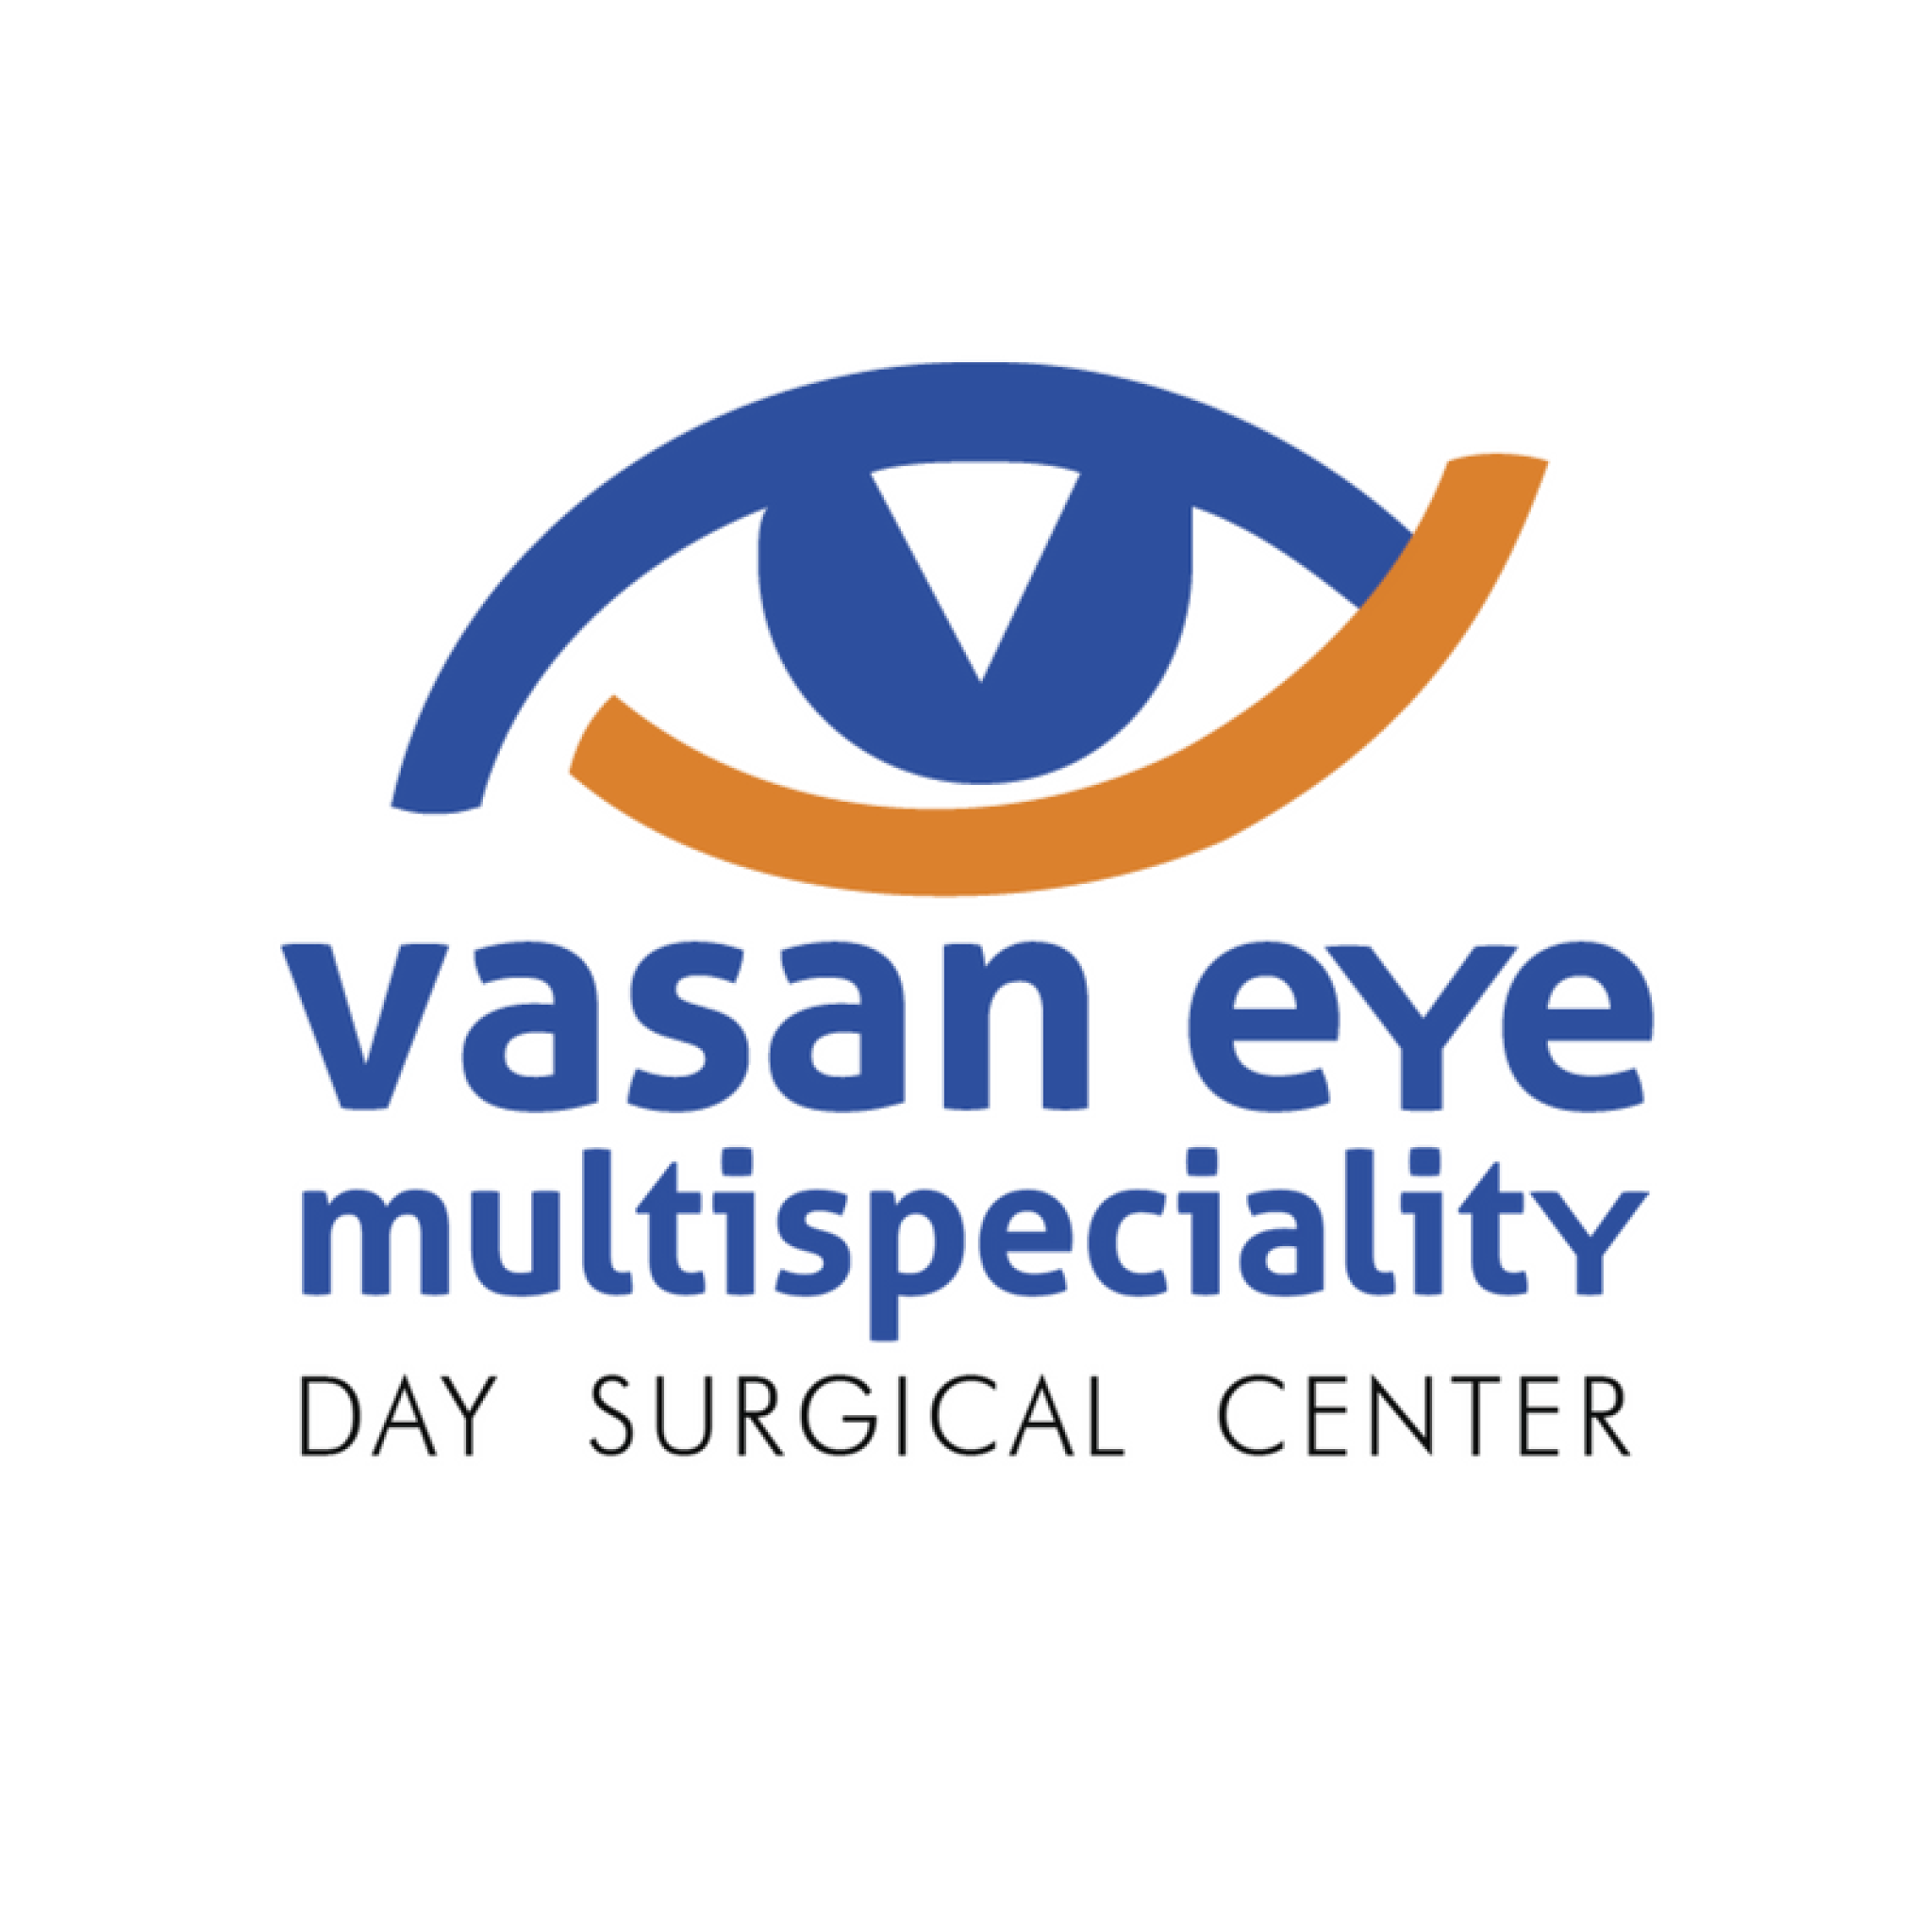 Vasan Eye Multispeciality Day Surgical Center